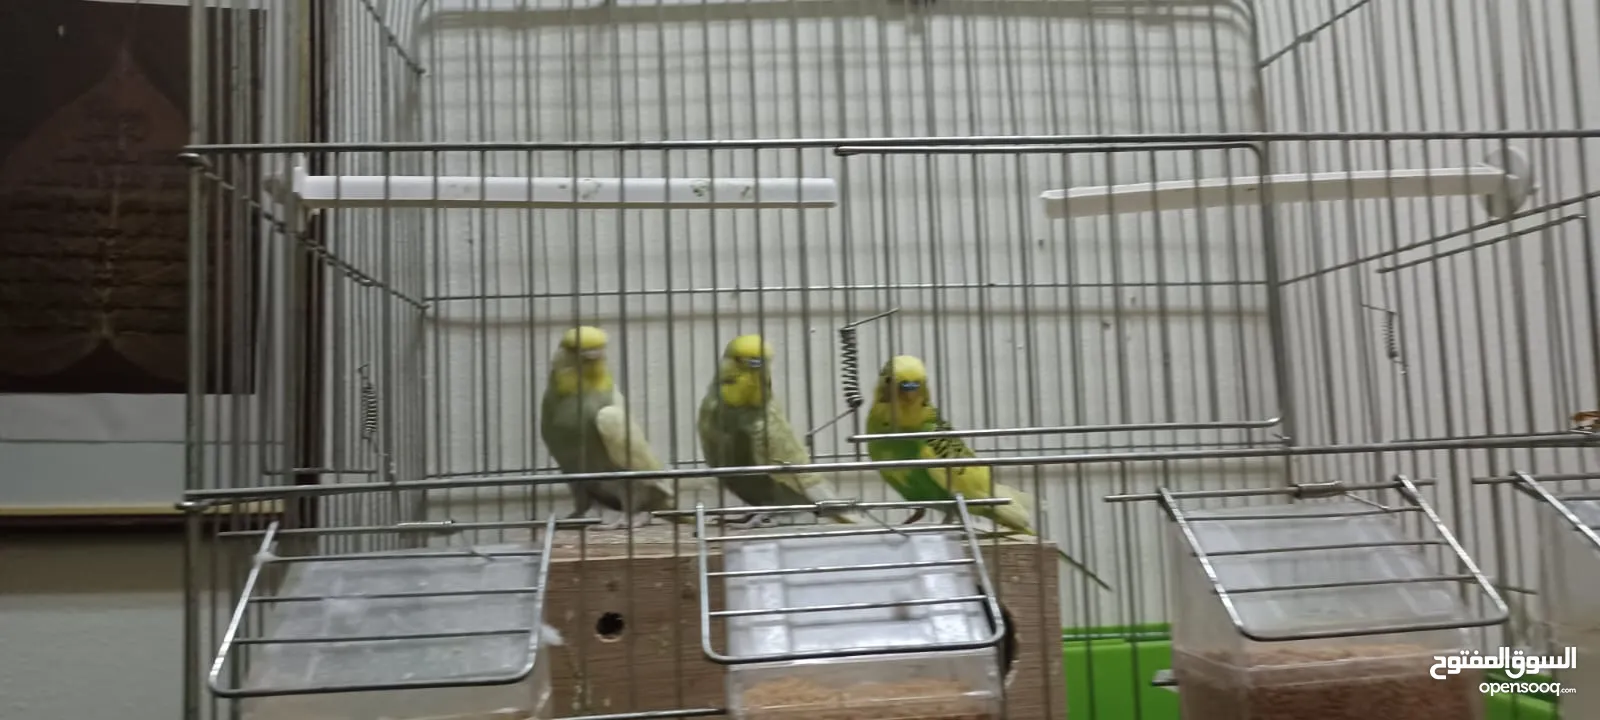 3 Love birds with cage and breeding box